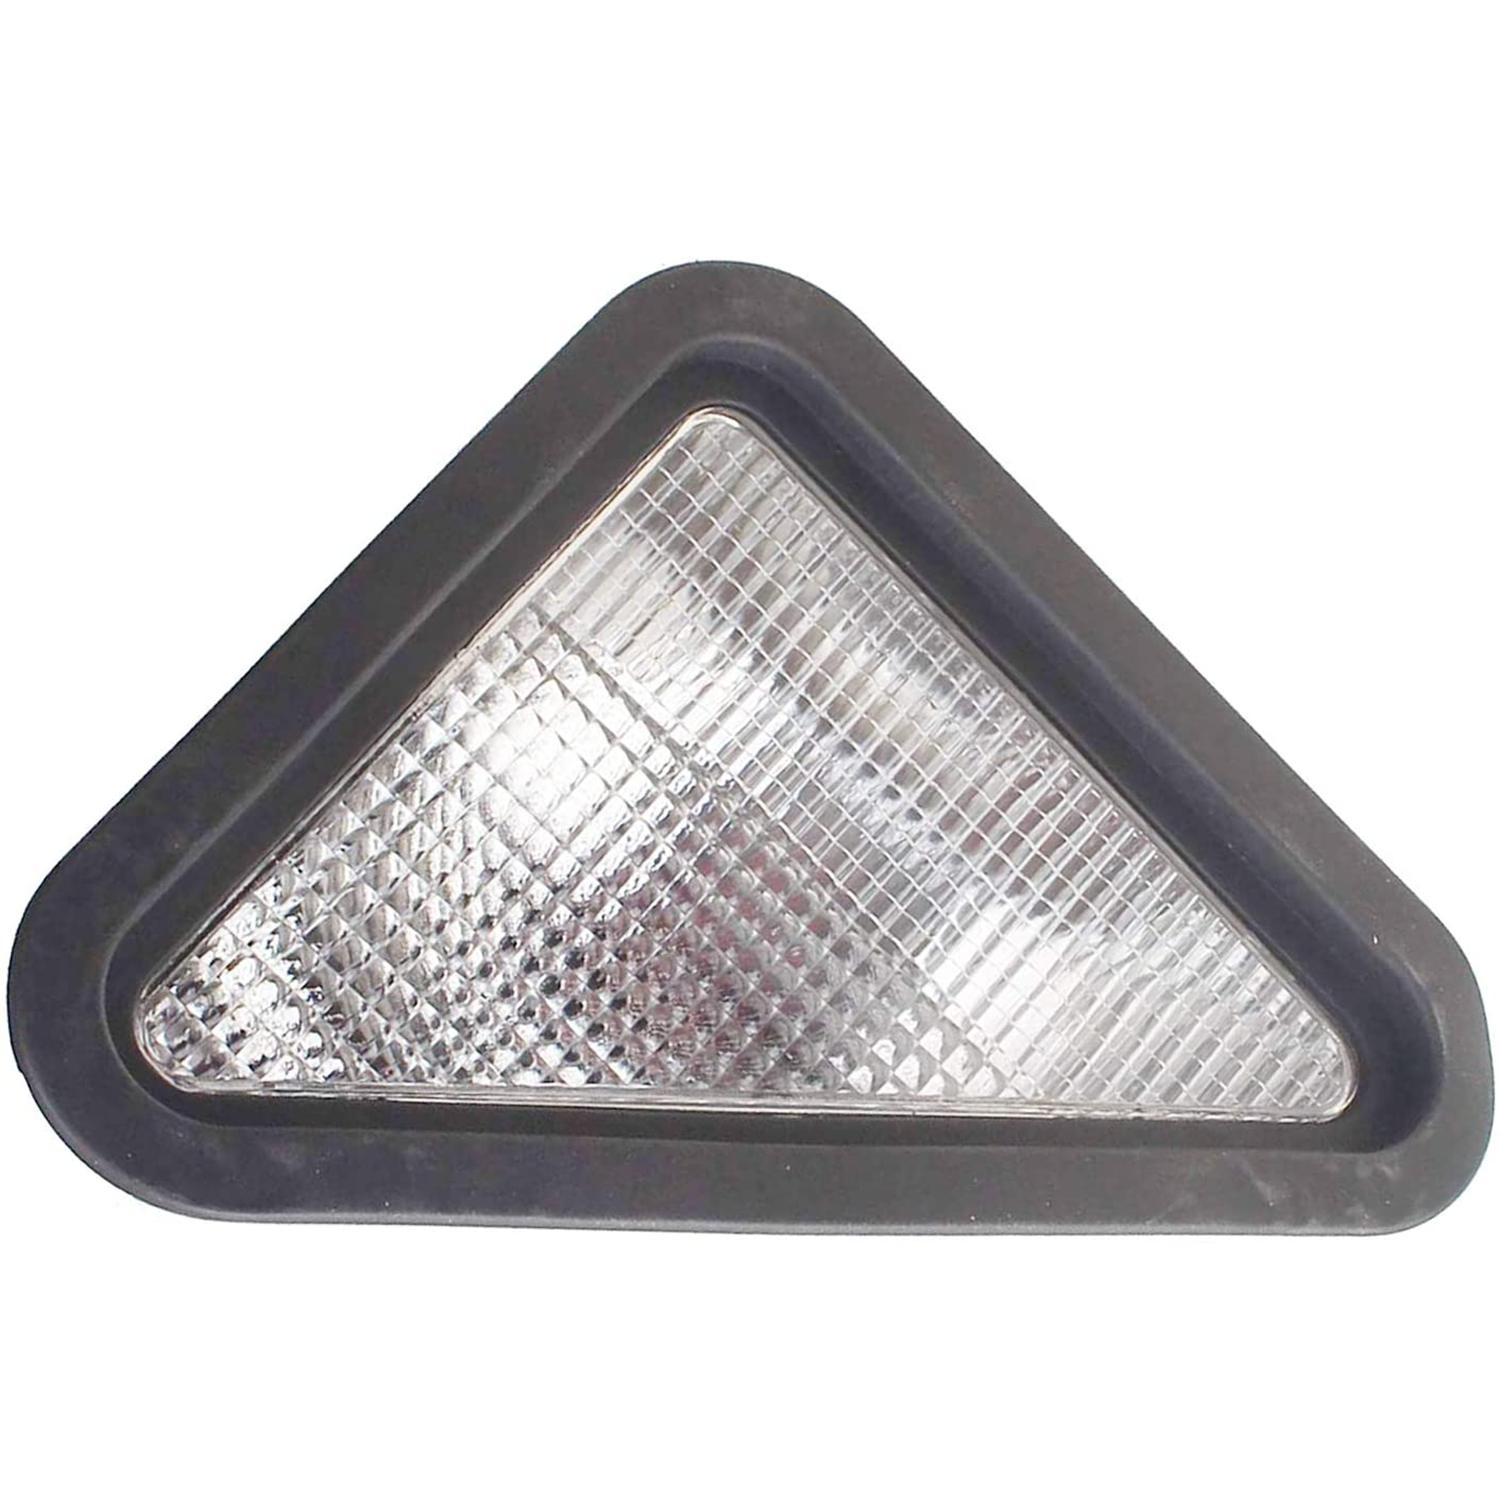 Right Headlight Lamp 6674401 6718043 Fit for Bobcat Skid Steer 751 753 763 773 863 864 873 883 963 - KUDUPARTS